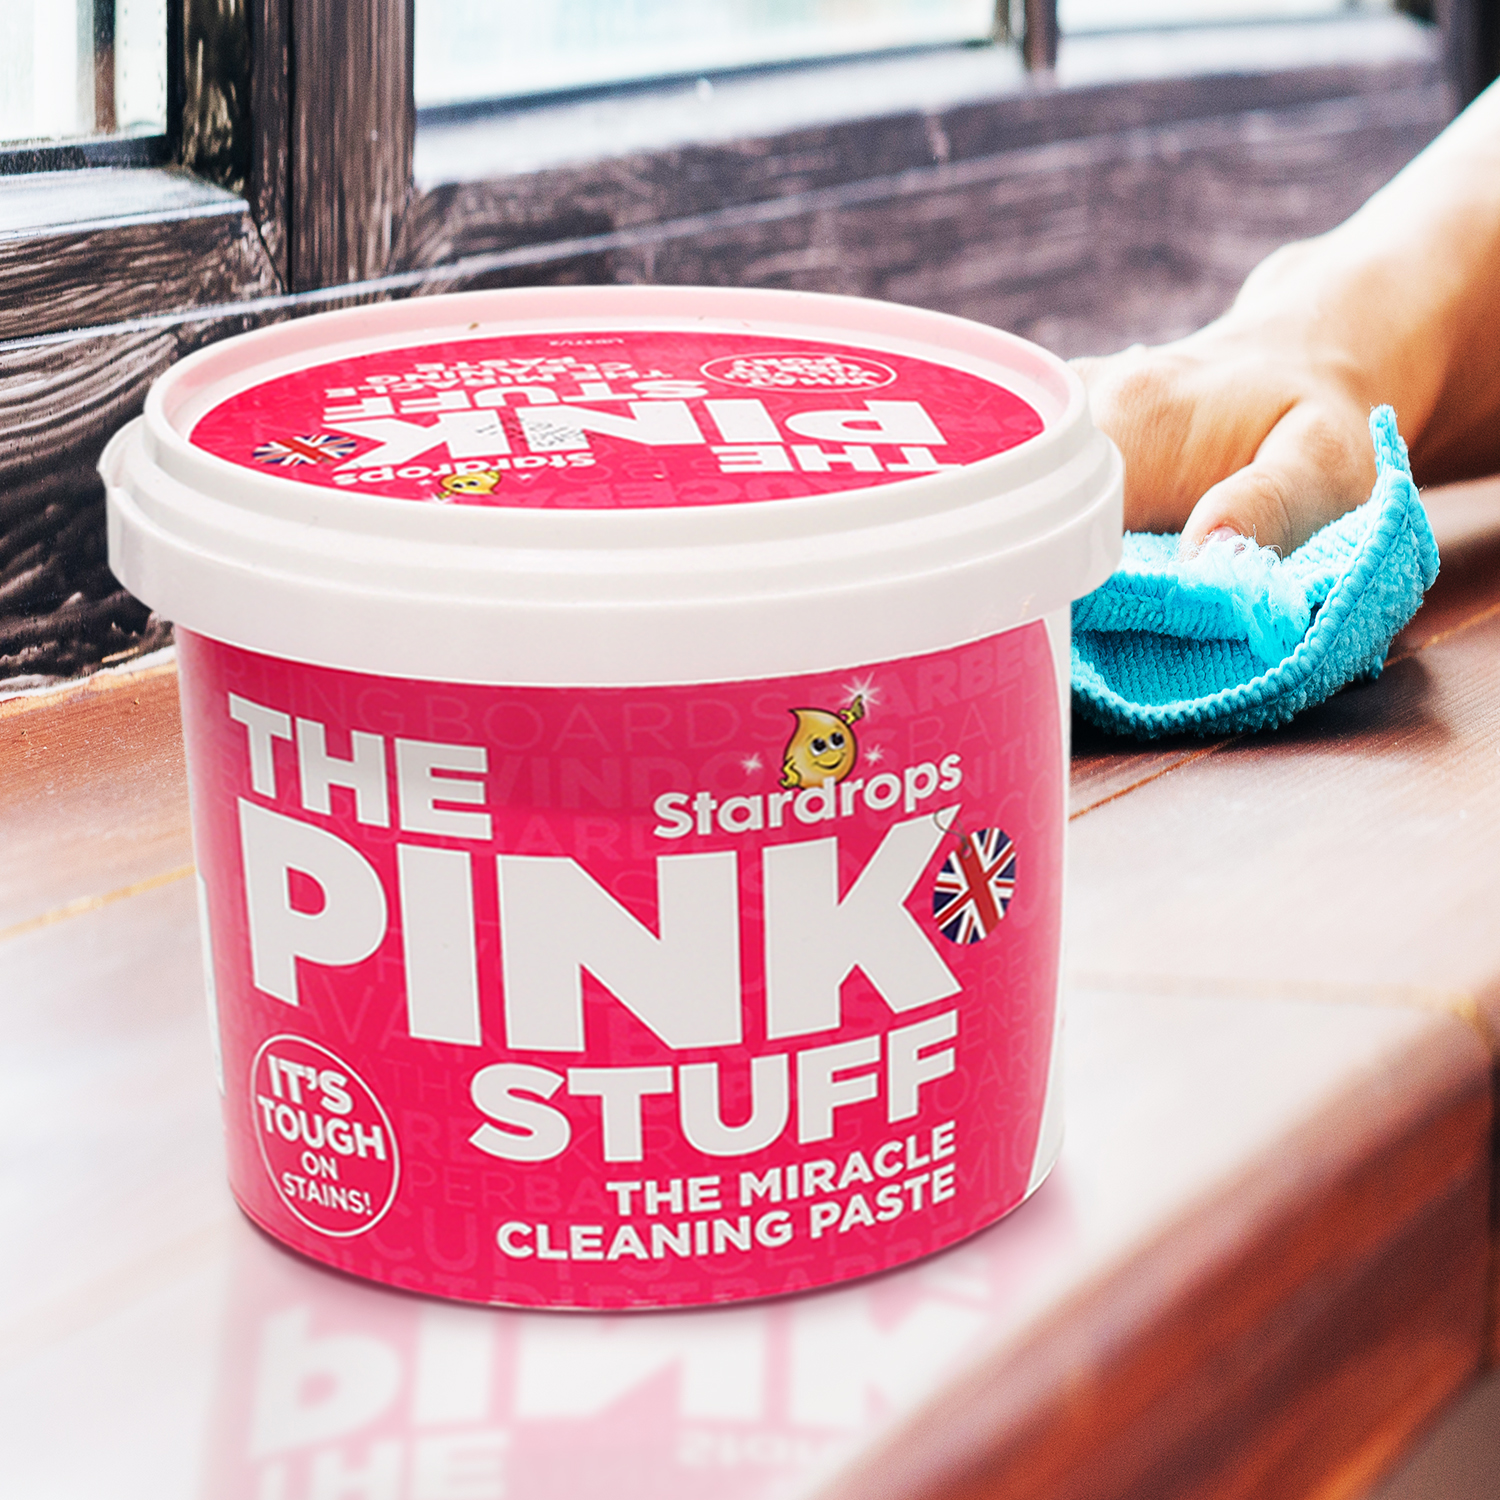 The pink stuff cleaning paste